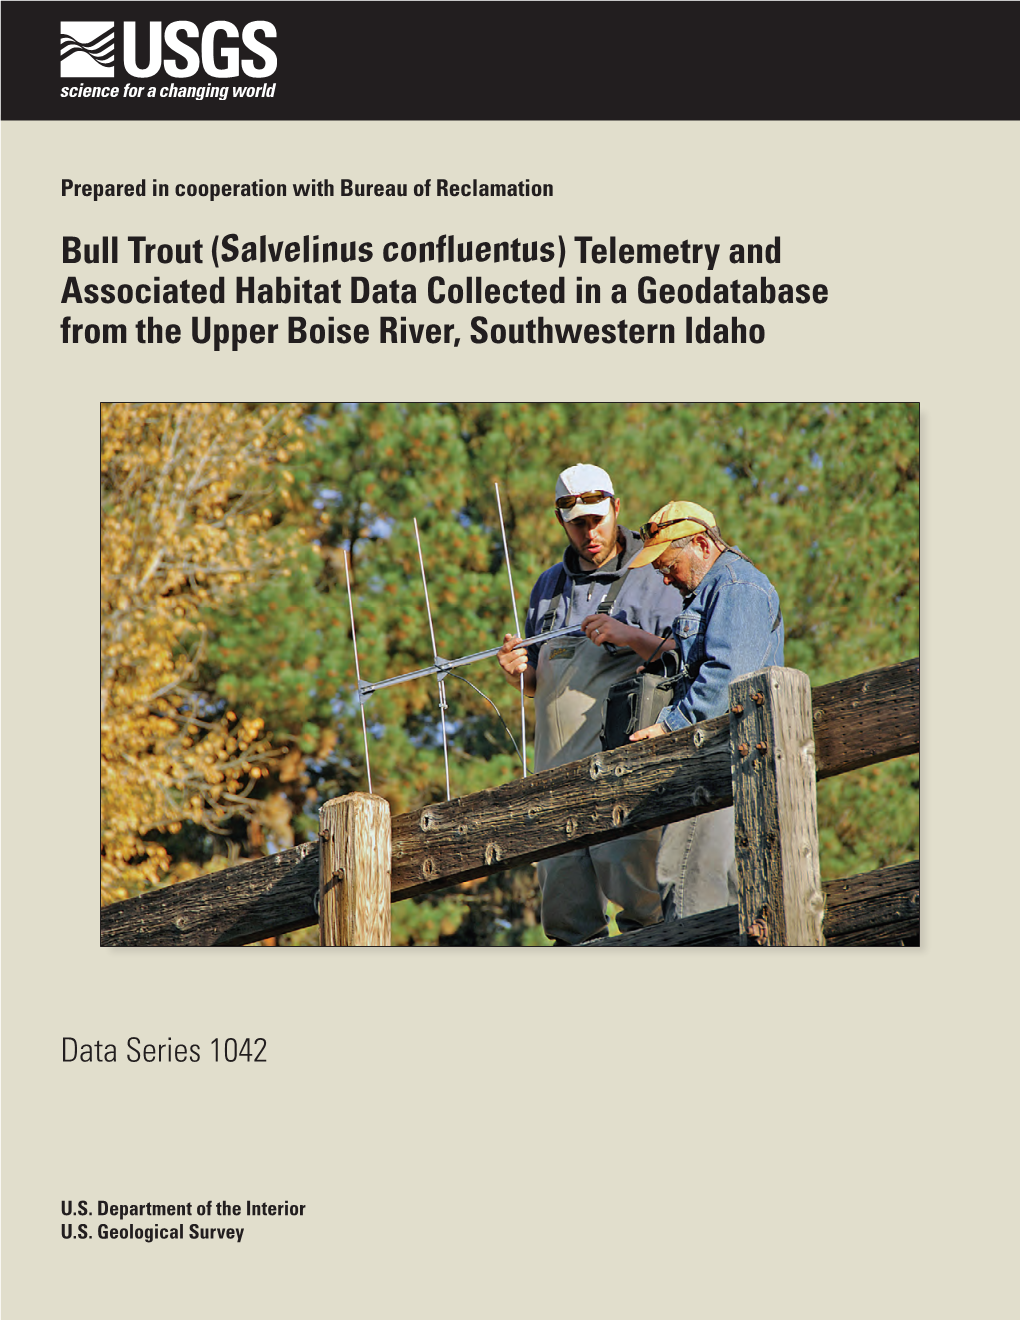 Bull Trout (Salvelinus Confluentus) Telemetry and Associated Habitat Data Collected in a Geodatabase from the Upper Boise River, Southwestern Idaho